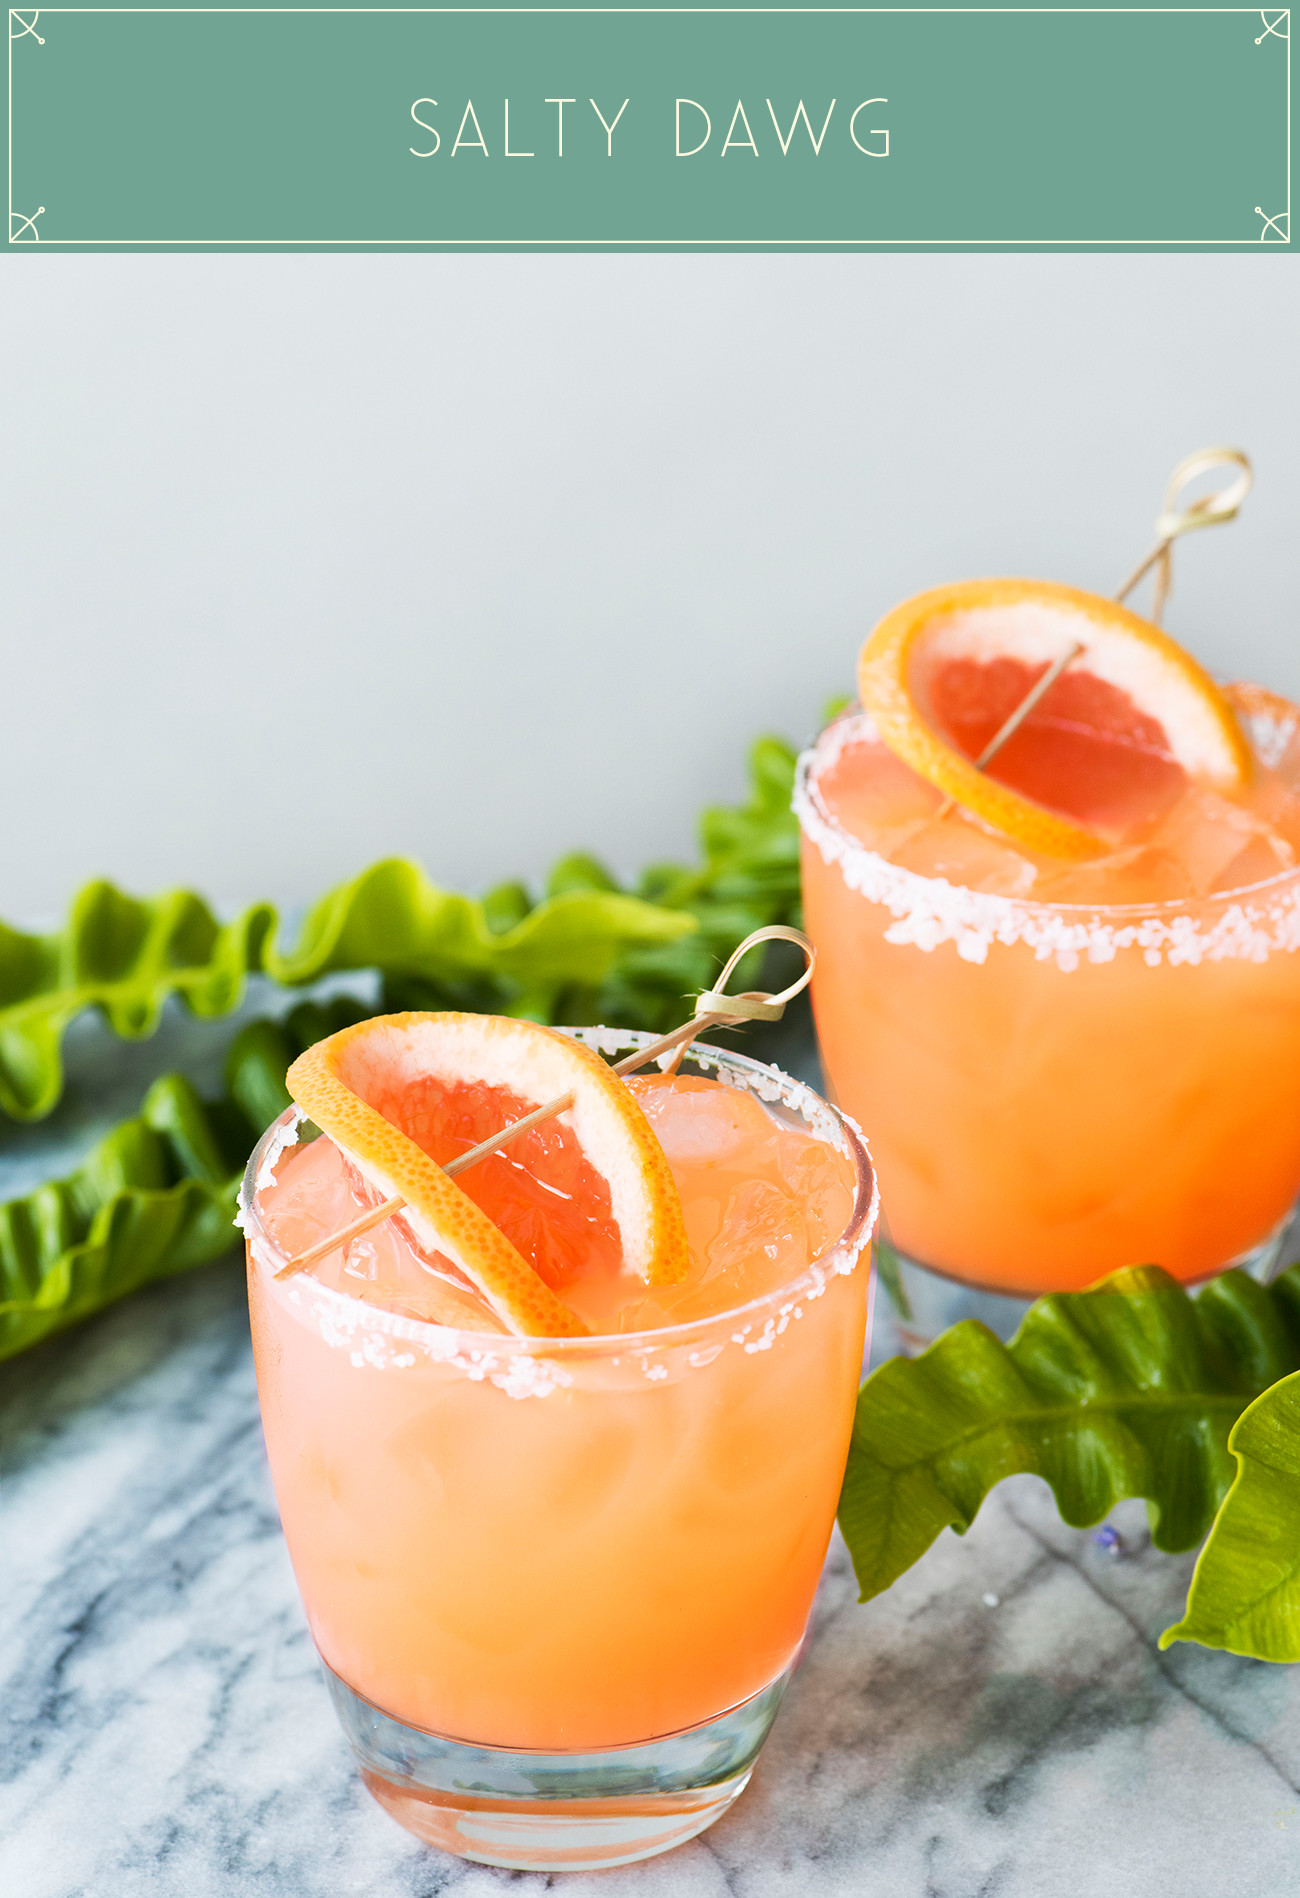 Low Calorie Vodka Drink Recipes
 12 Pretty Vodka Cocktails That Are Actually Kinda Healthy